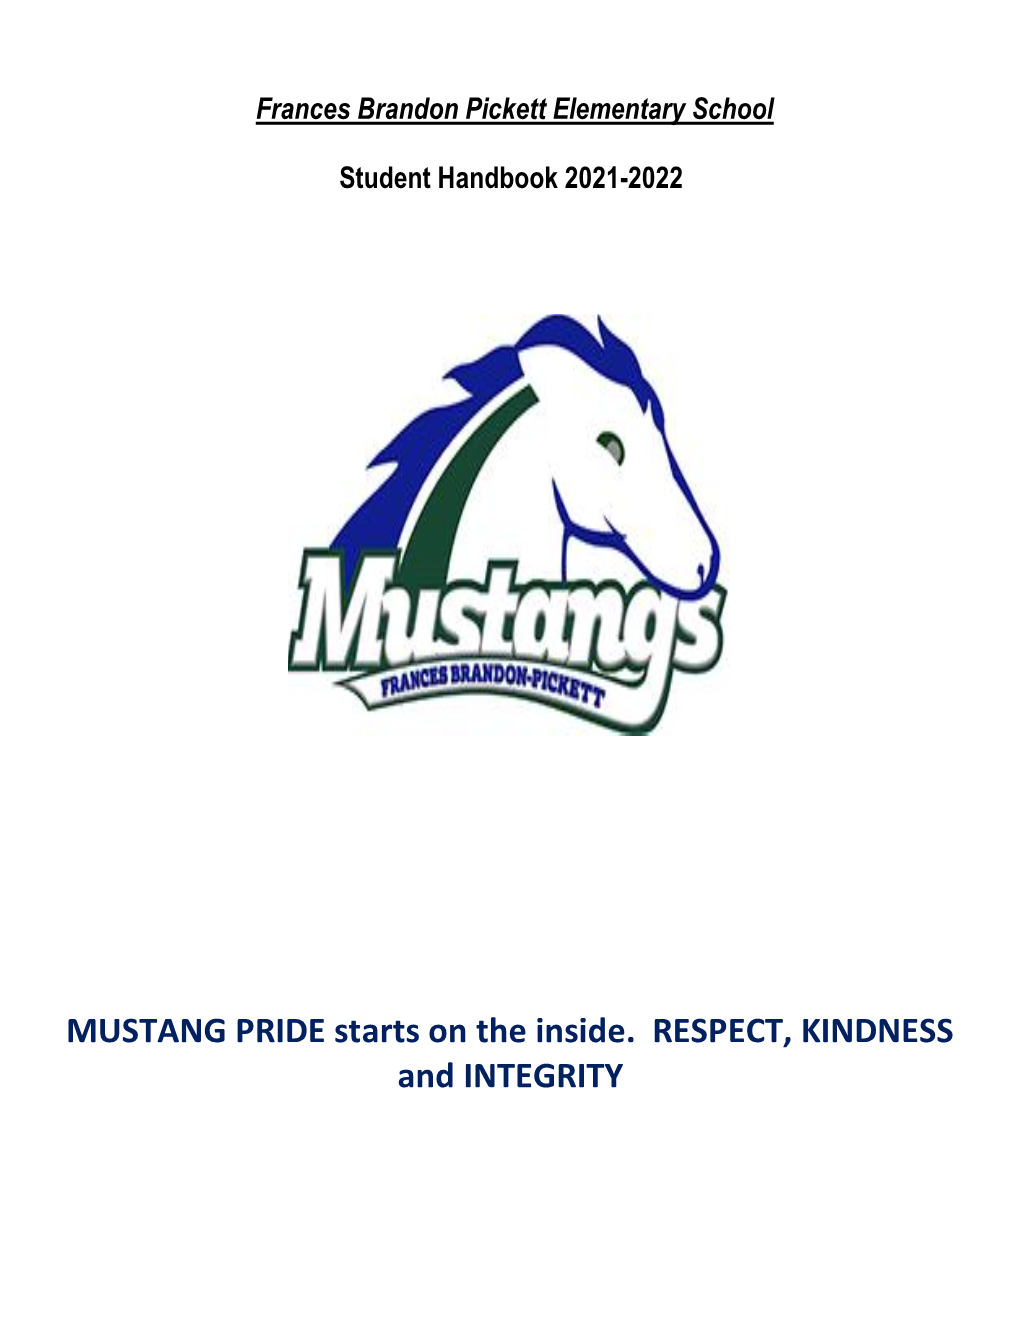 MUSTANG PRIDE Starts on the Inside. RESPECT, KINDNESS and INTEGRITY